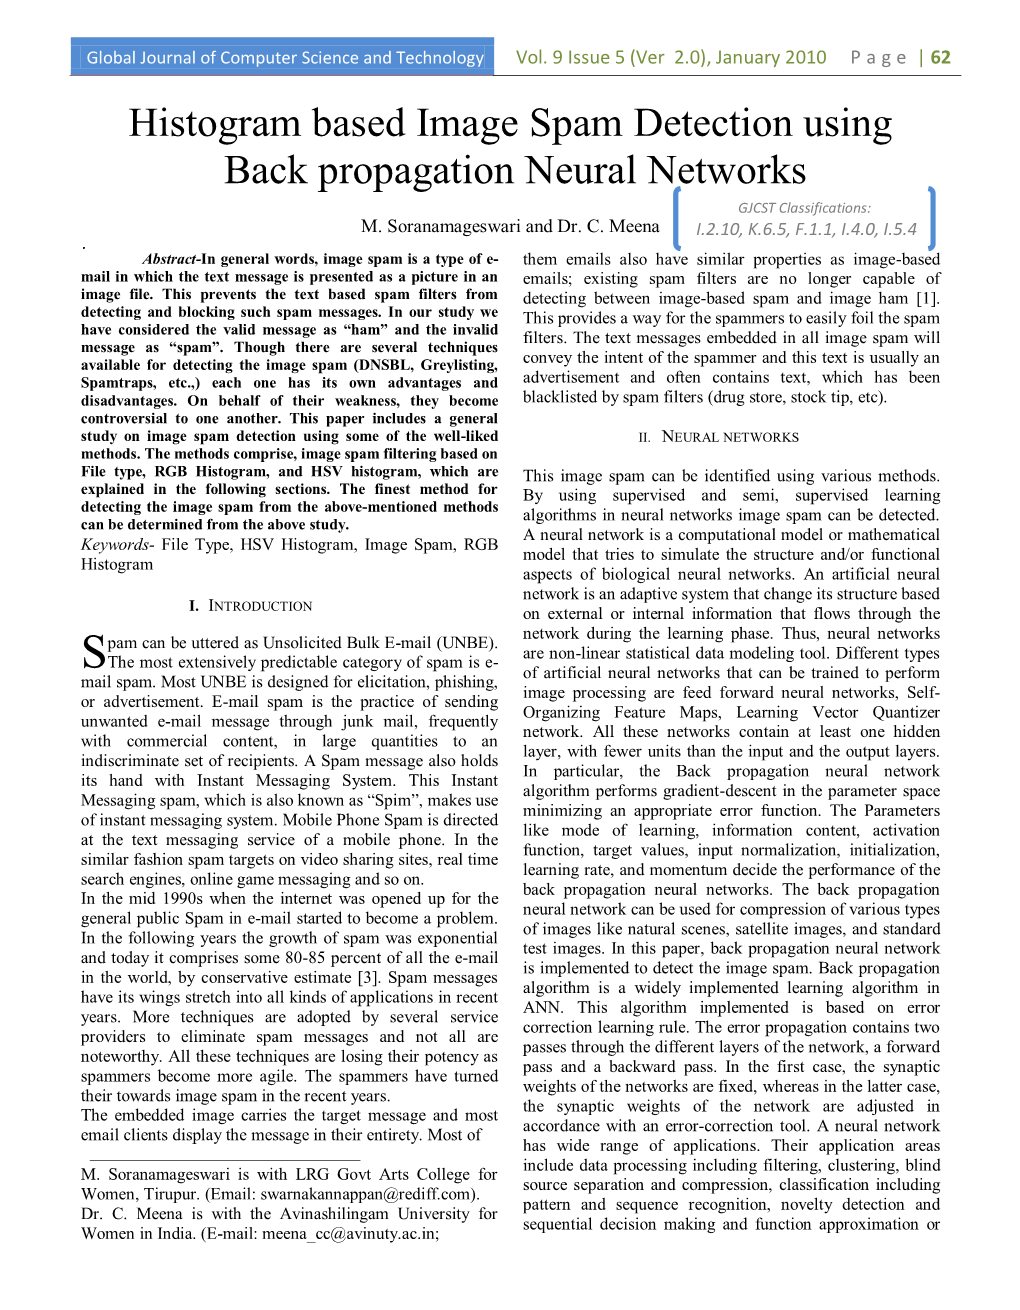 Histogram Based Image Spam Detection Using Back Propagation Neural Networks GJCST Classifications: M